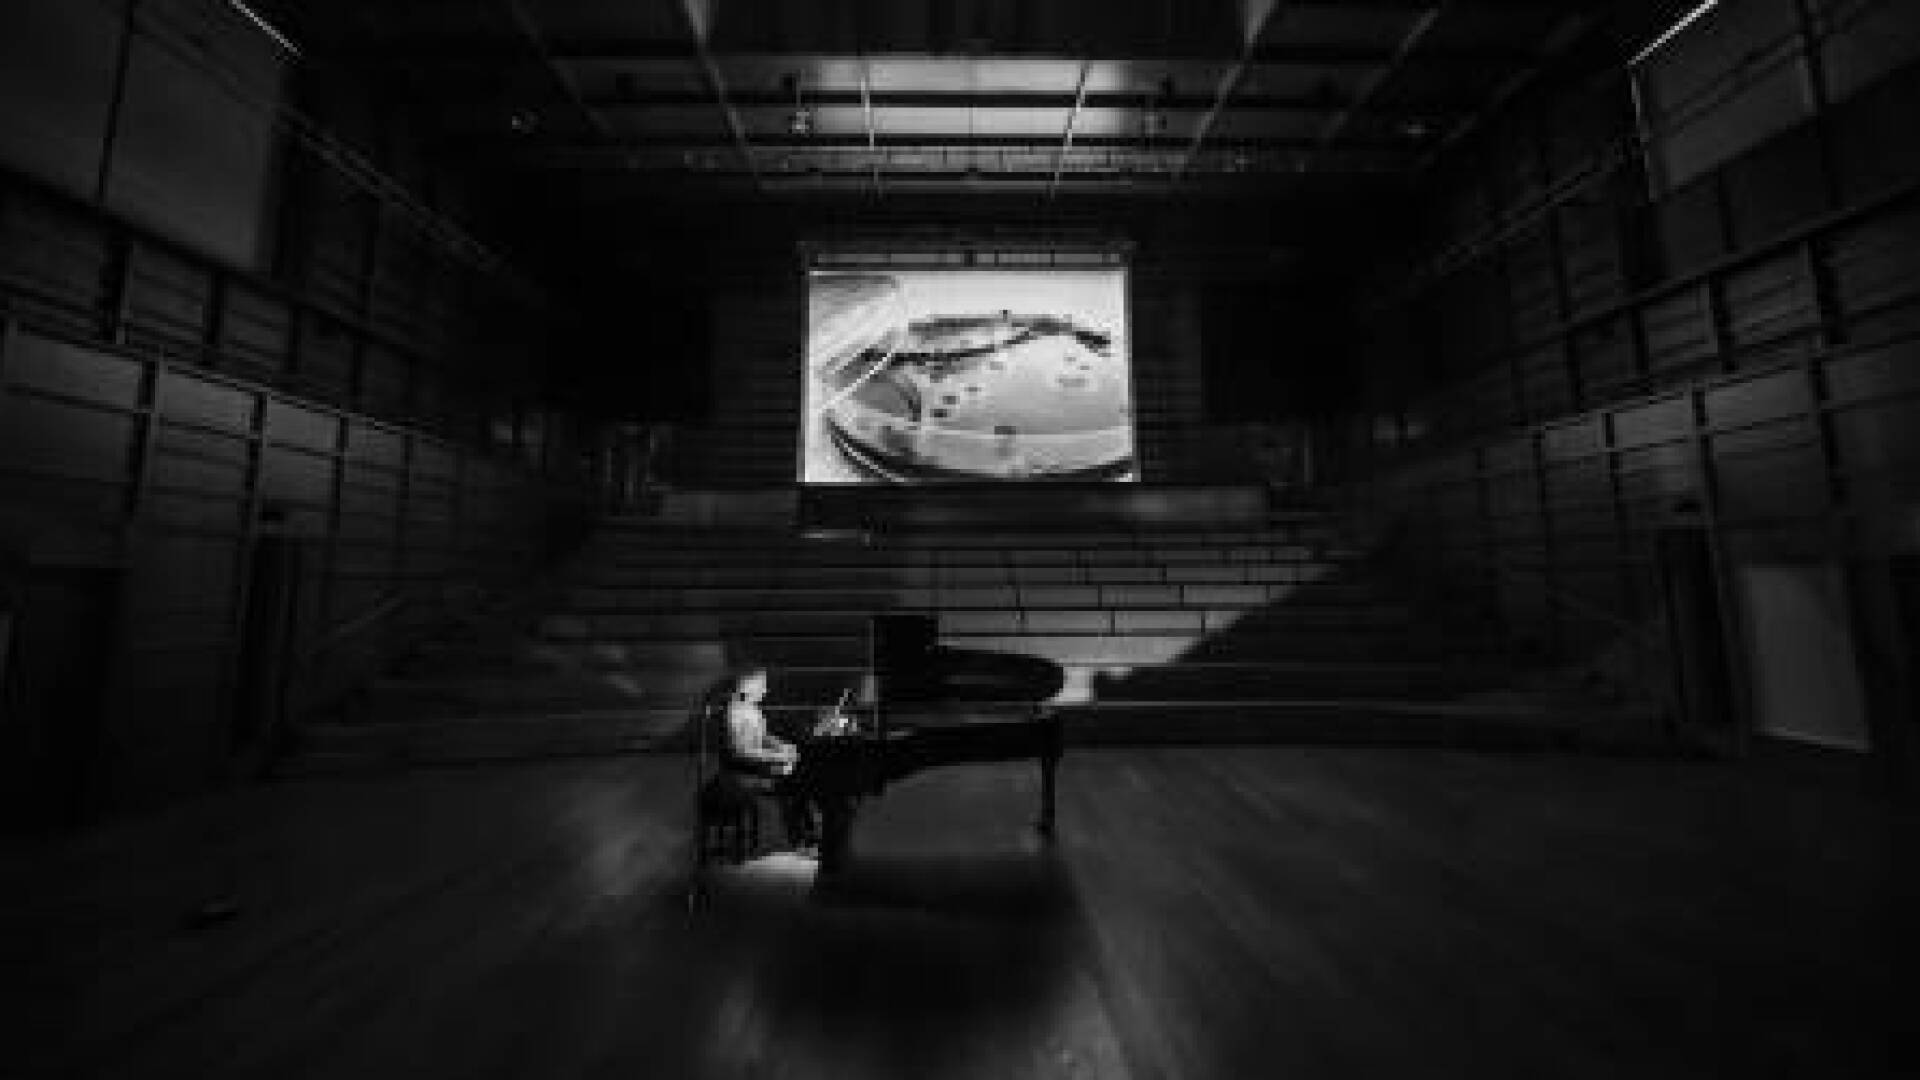 Pianist playing in a concert hall